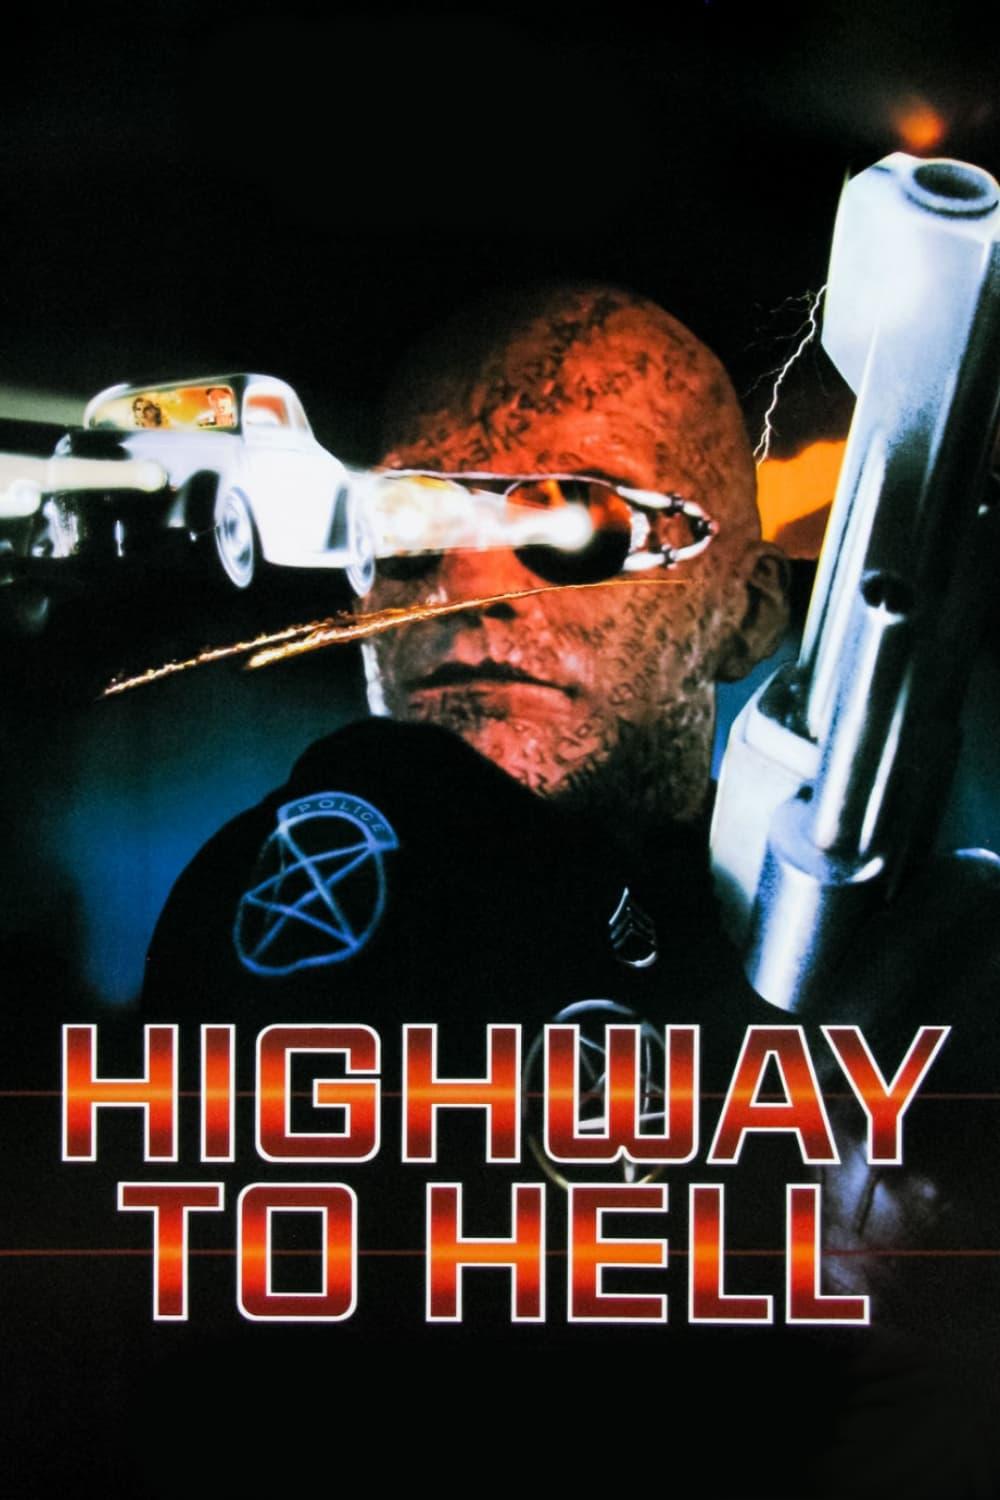 Highway to Hell poster